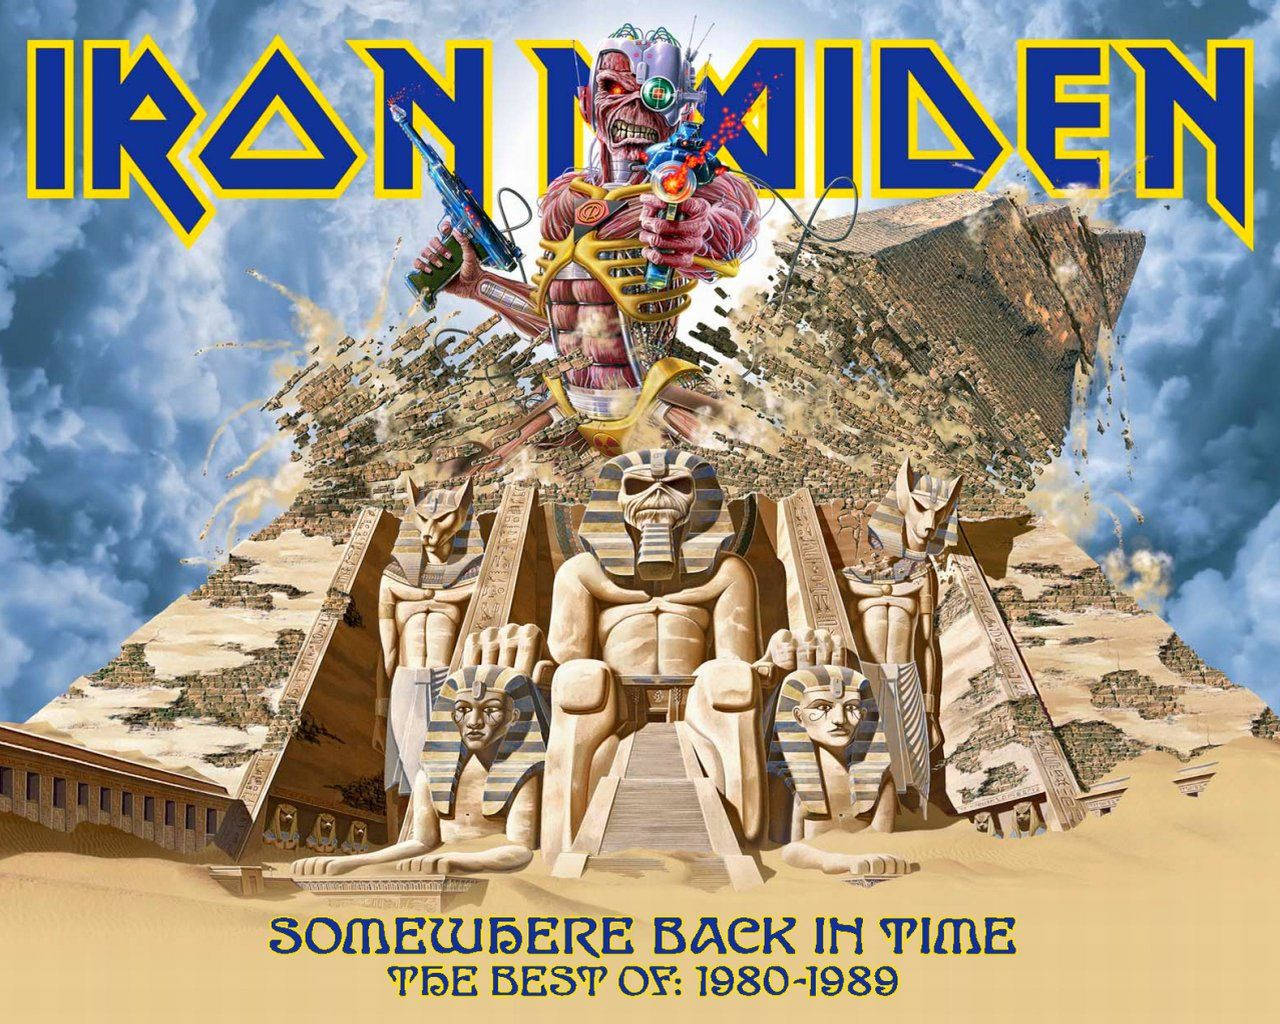 Iron Maiden: Time to Rock N' Roll Wallpaper